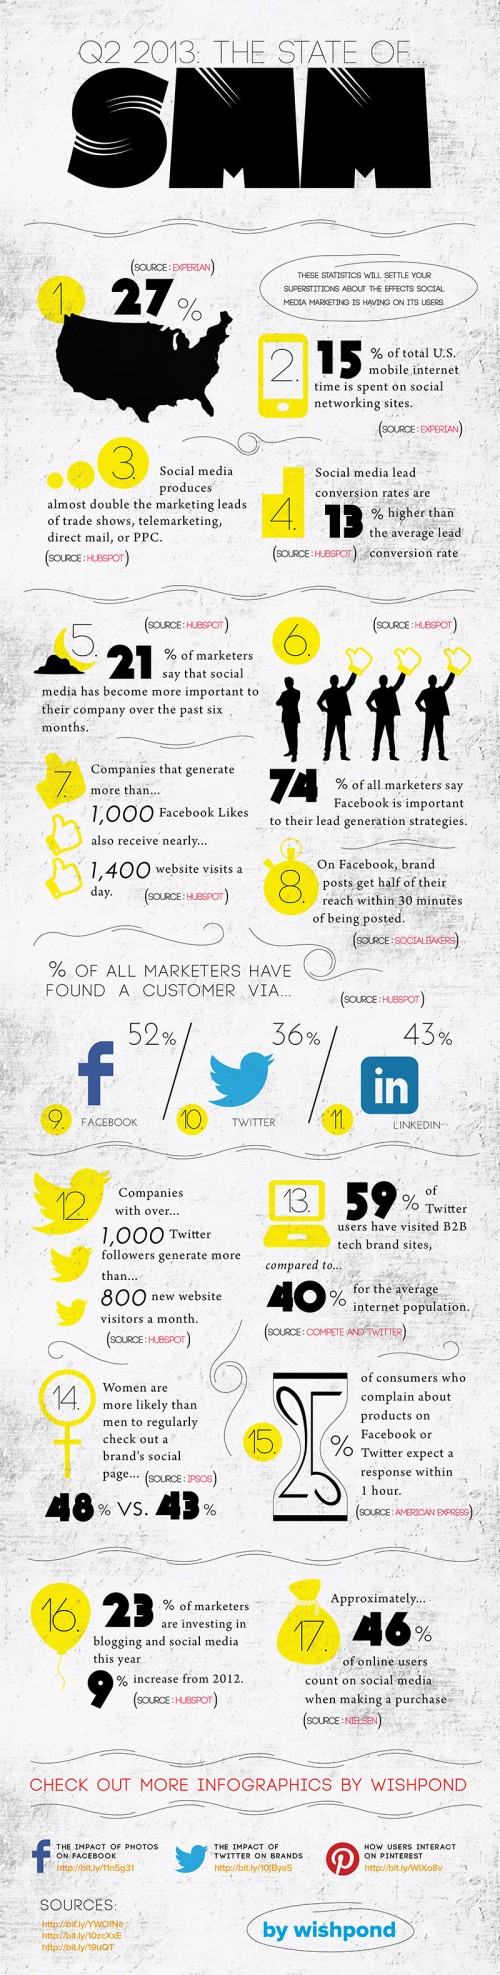 The State Of Social Media Marketing Q2 2013 Infographic